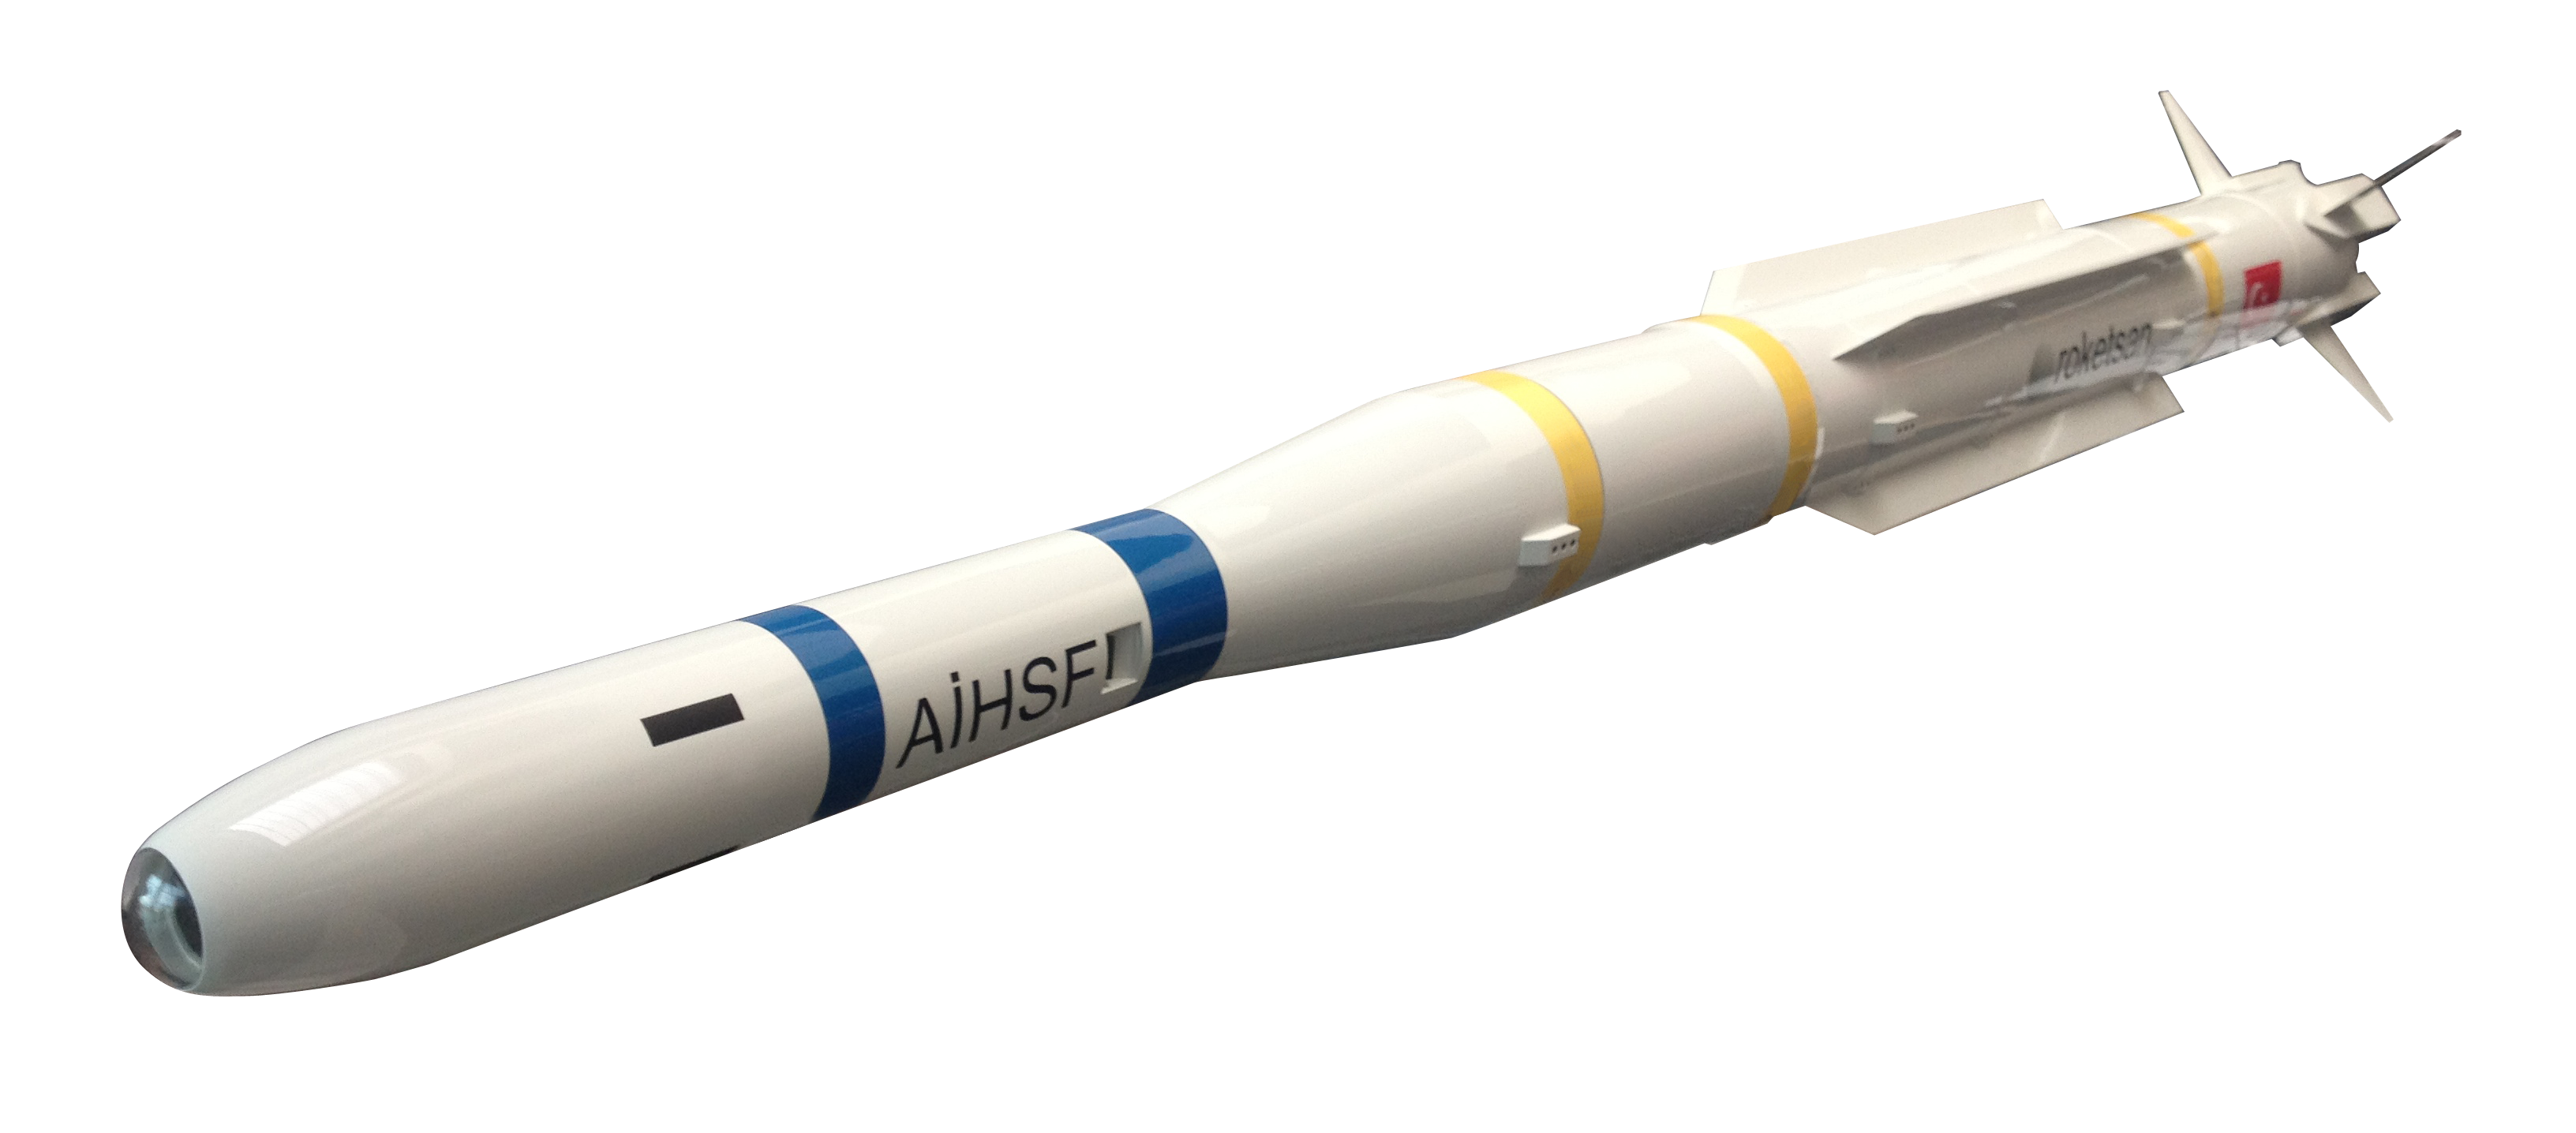 Missile Scarica PNG